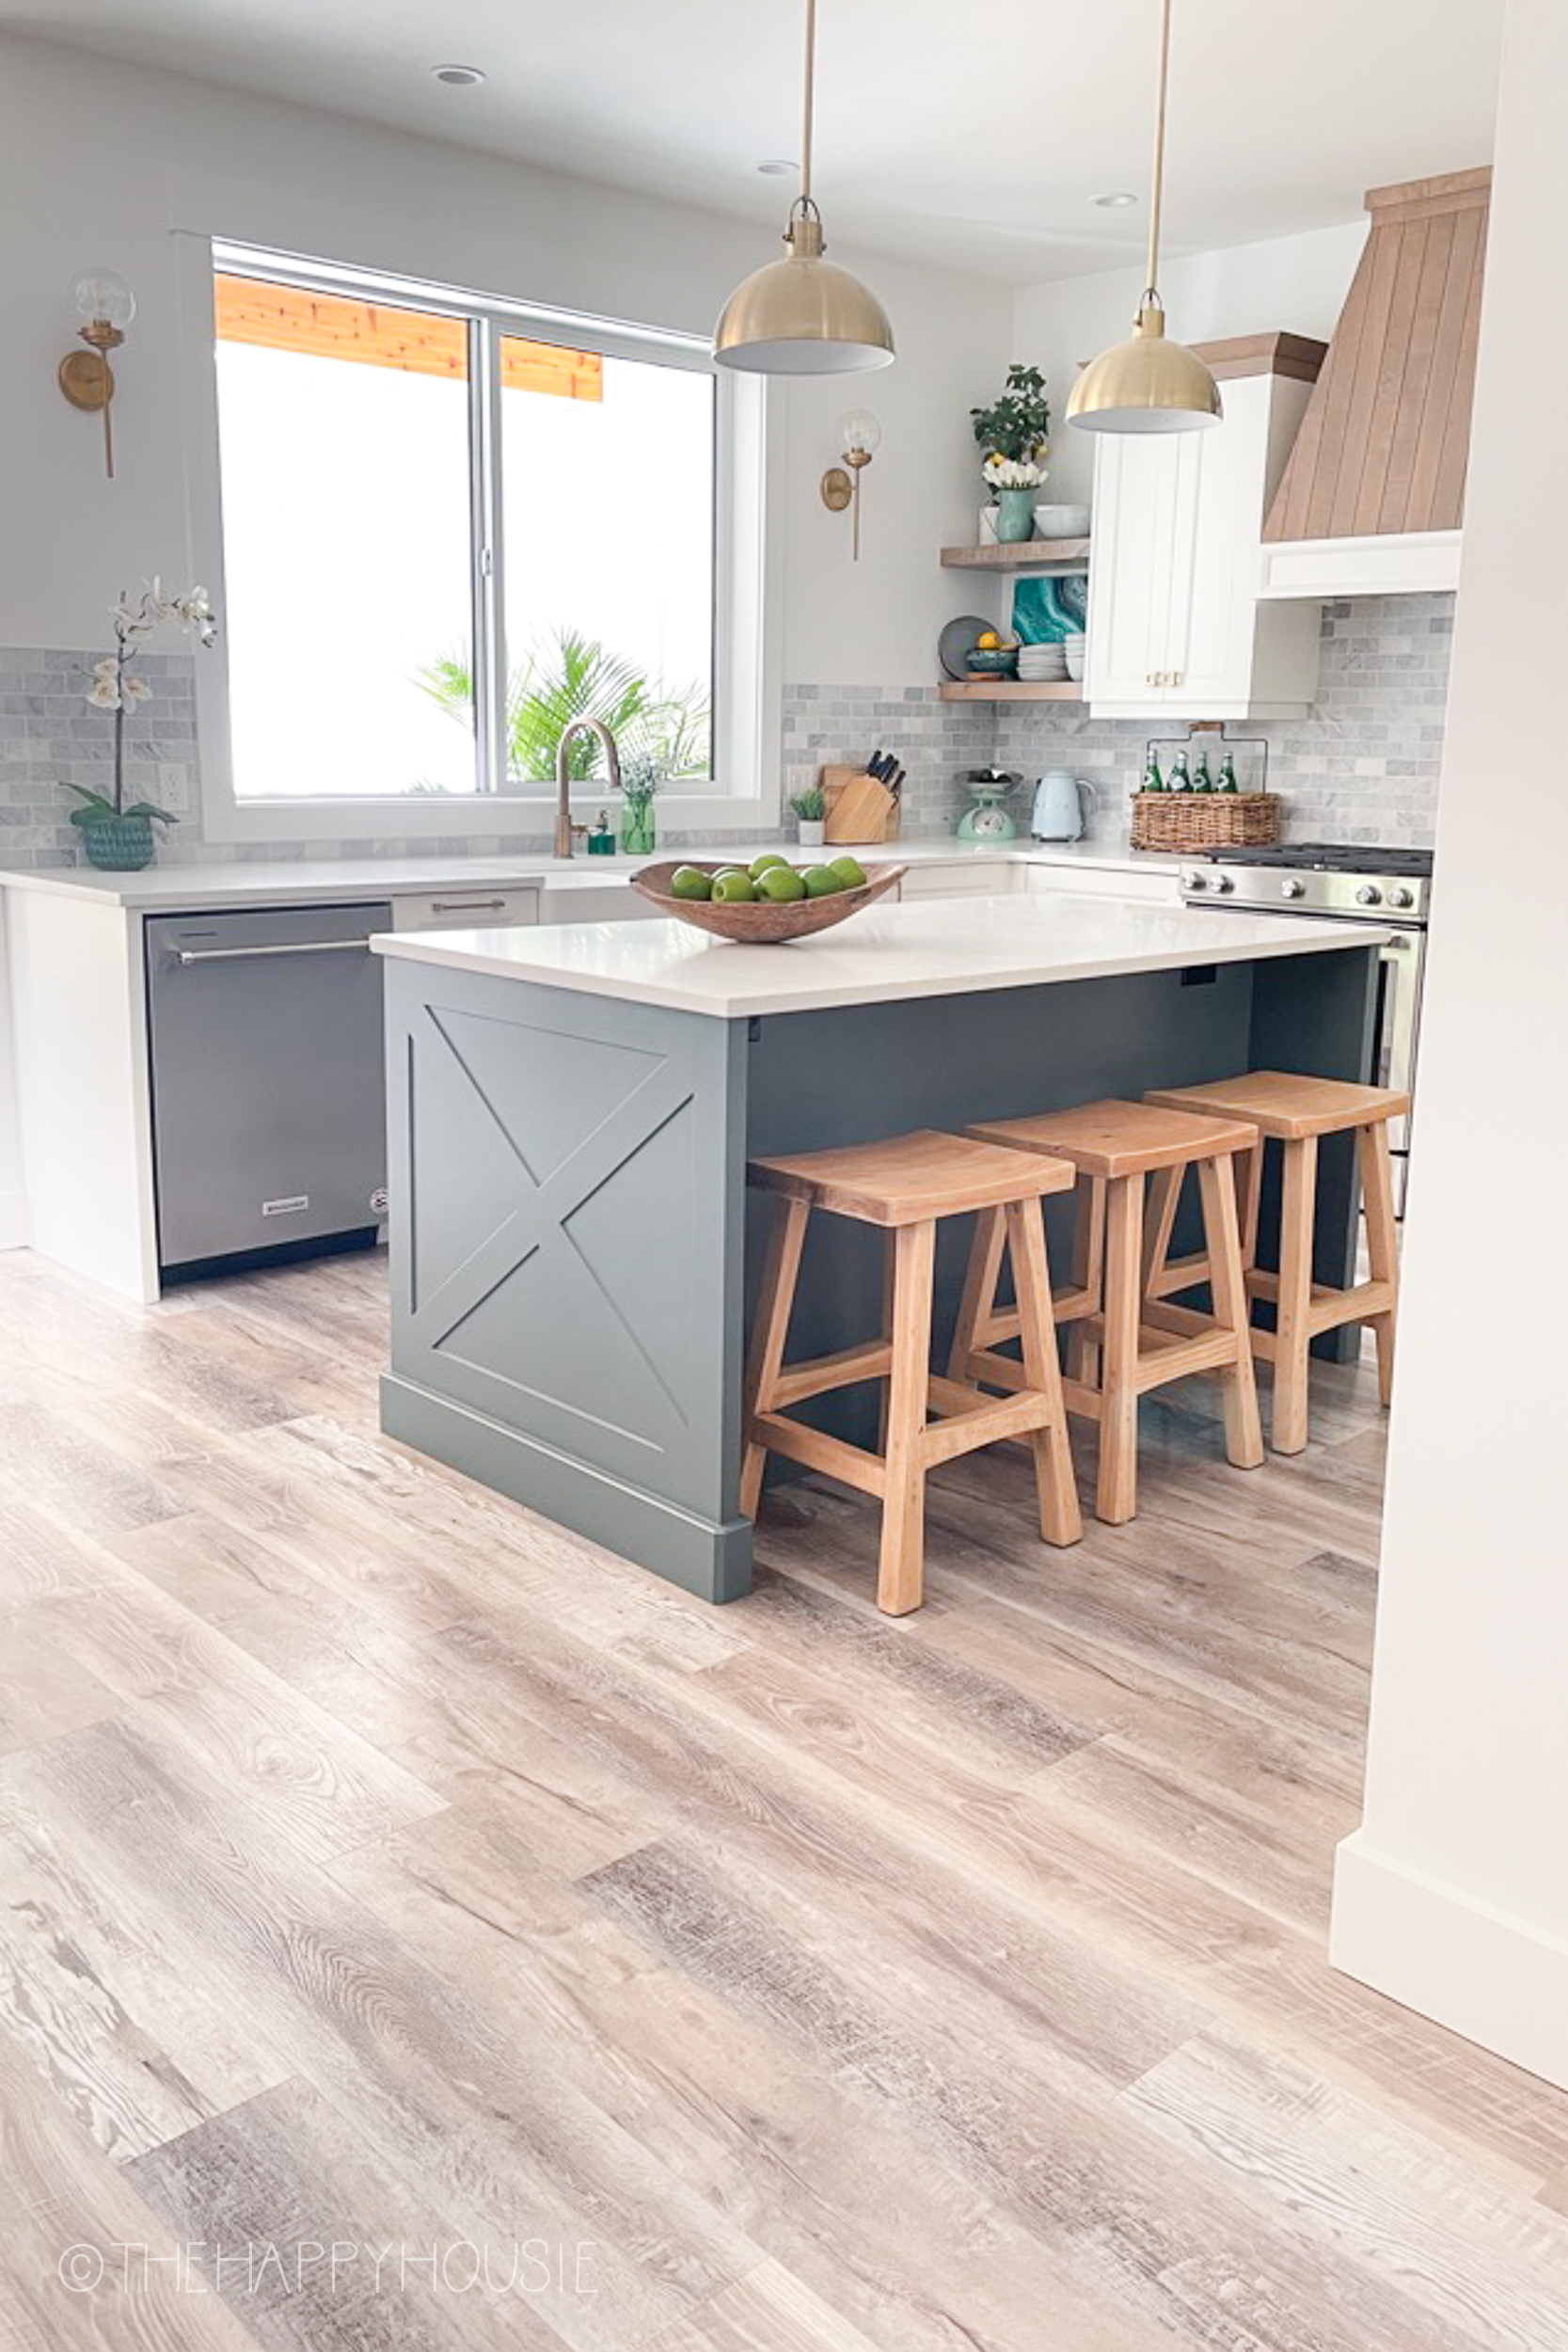 Why We Chose Vinyl Plank Flooring for Our New Build Home | The Happy Housie